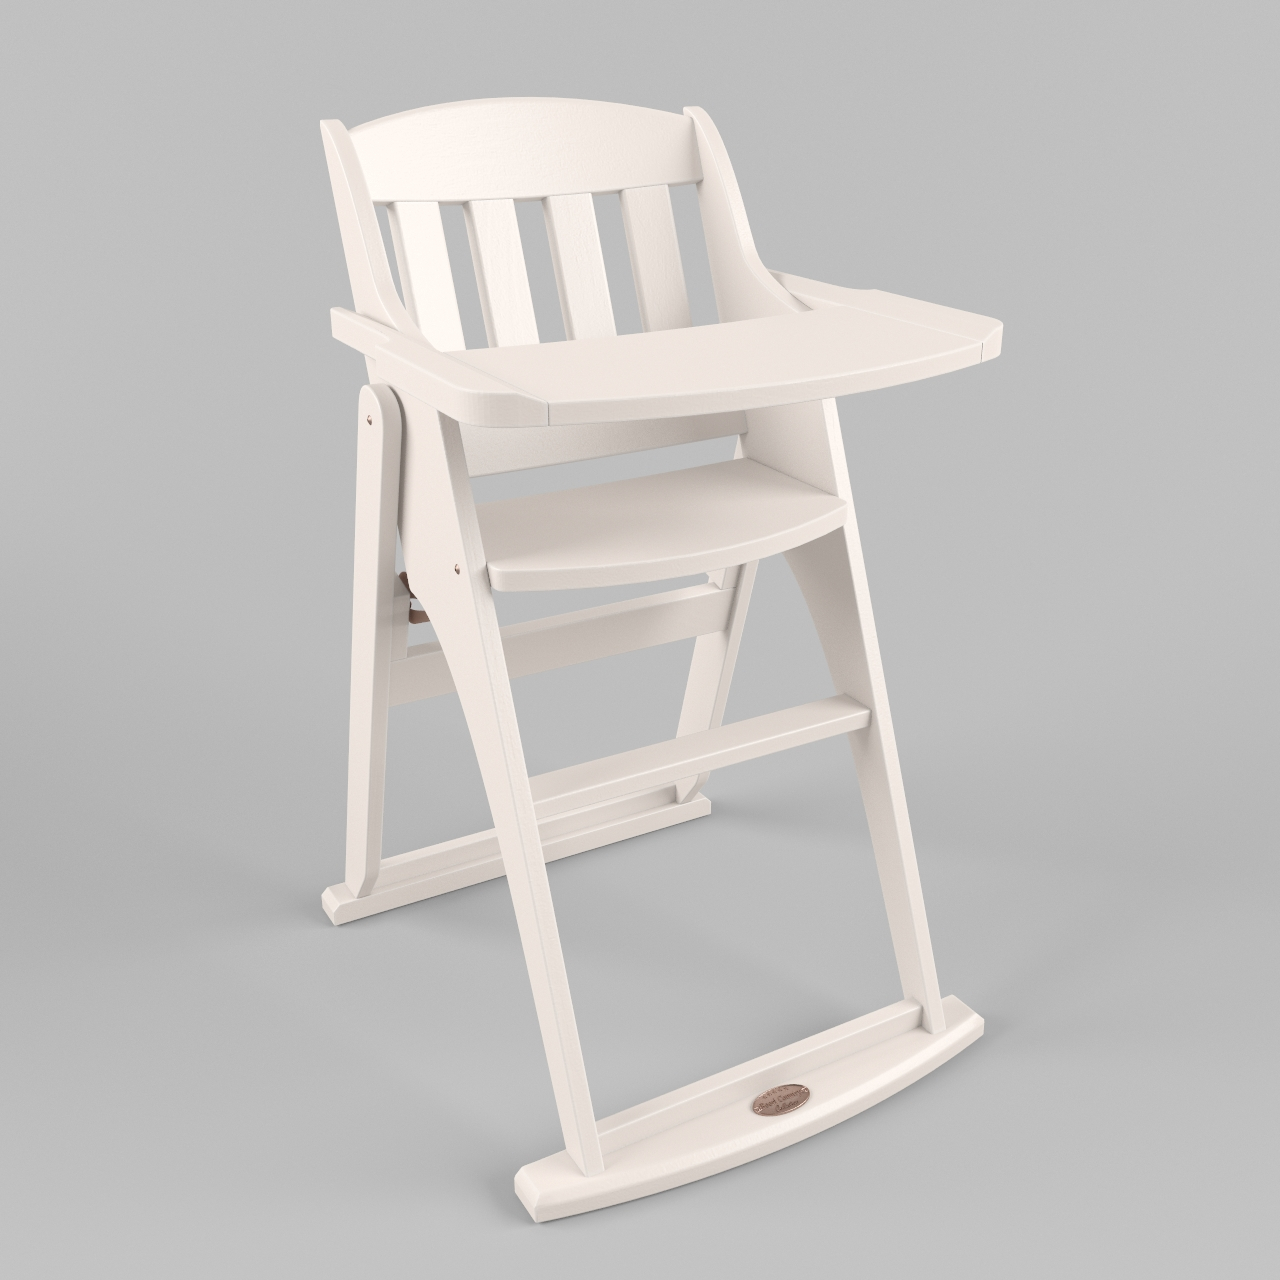 Chair for child 01 6